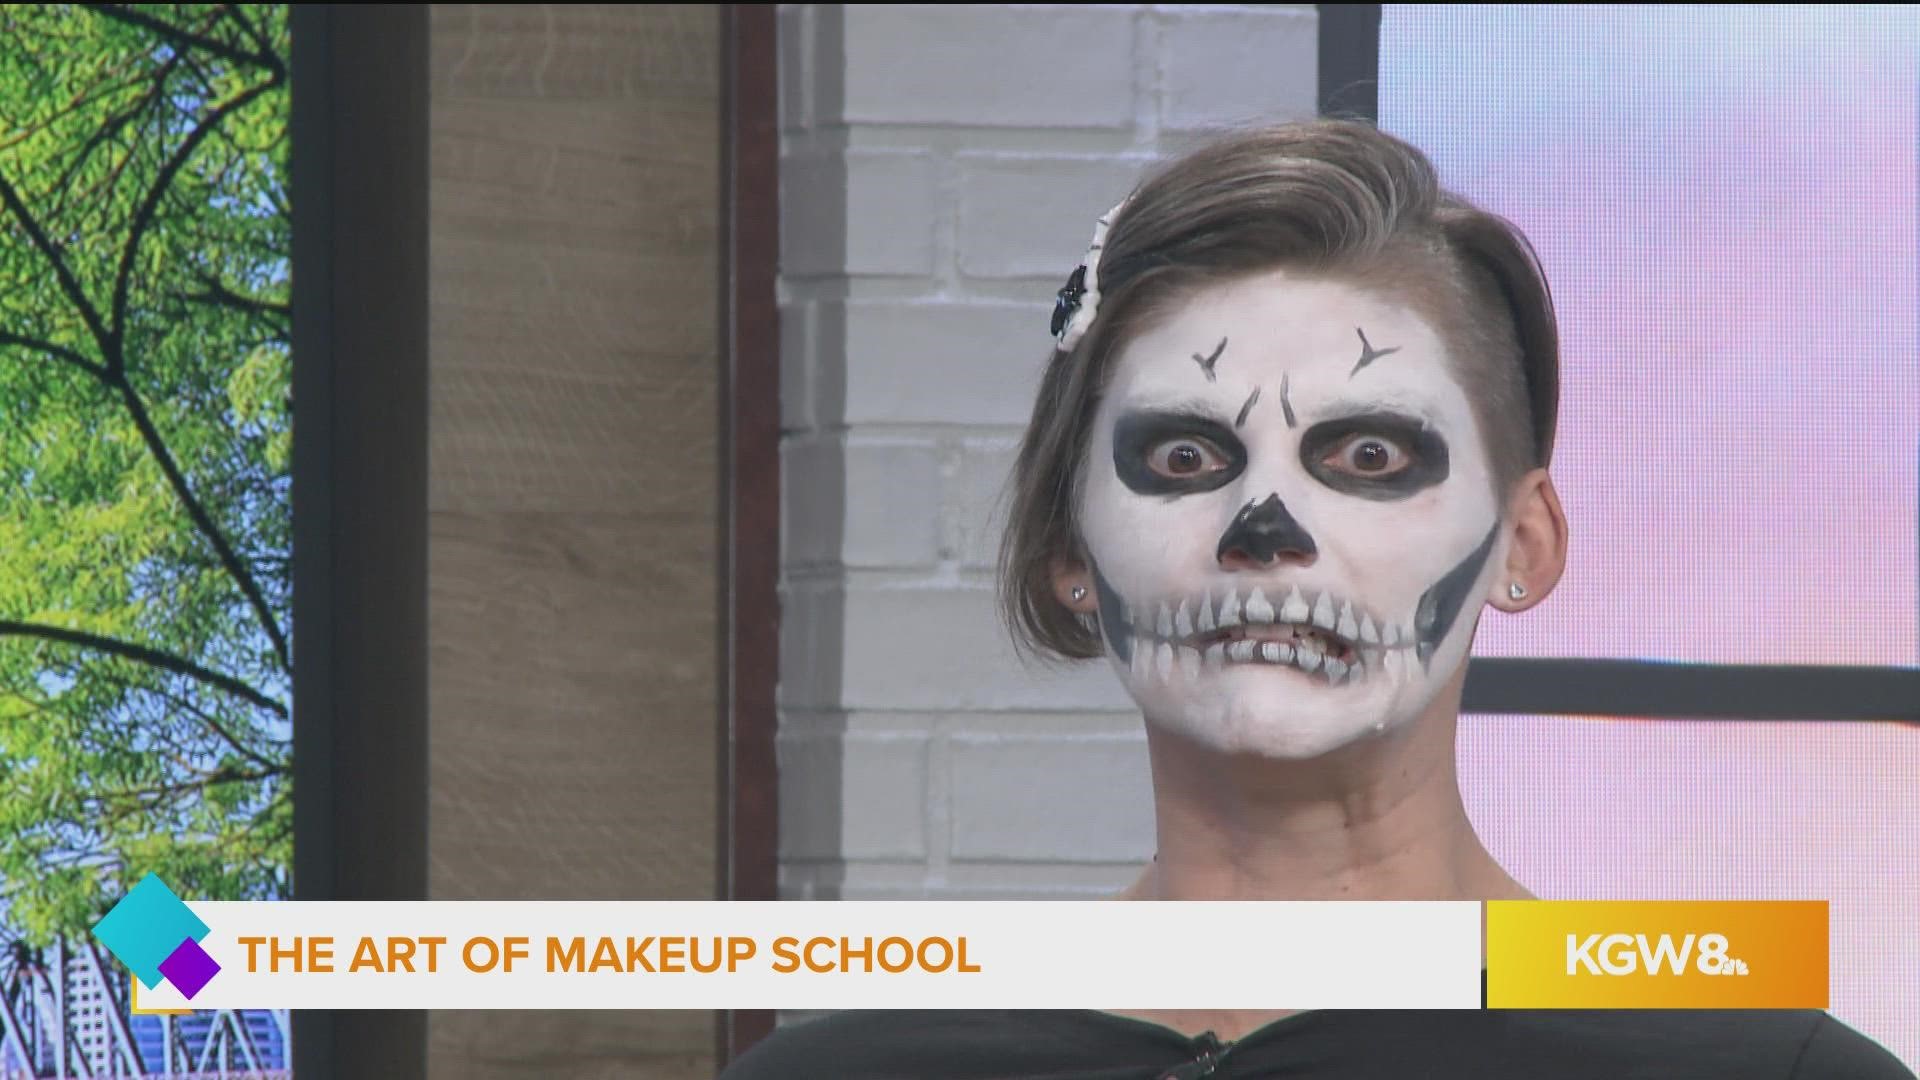 Makeup tips for trick-or-treating